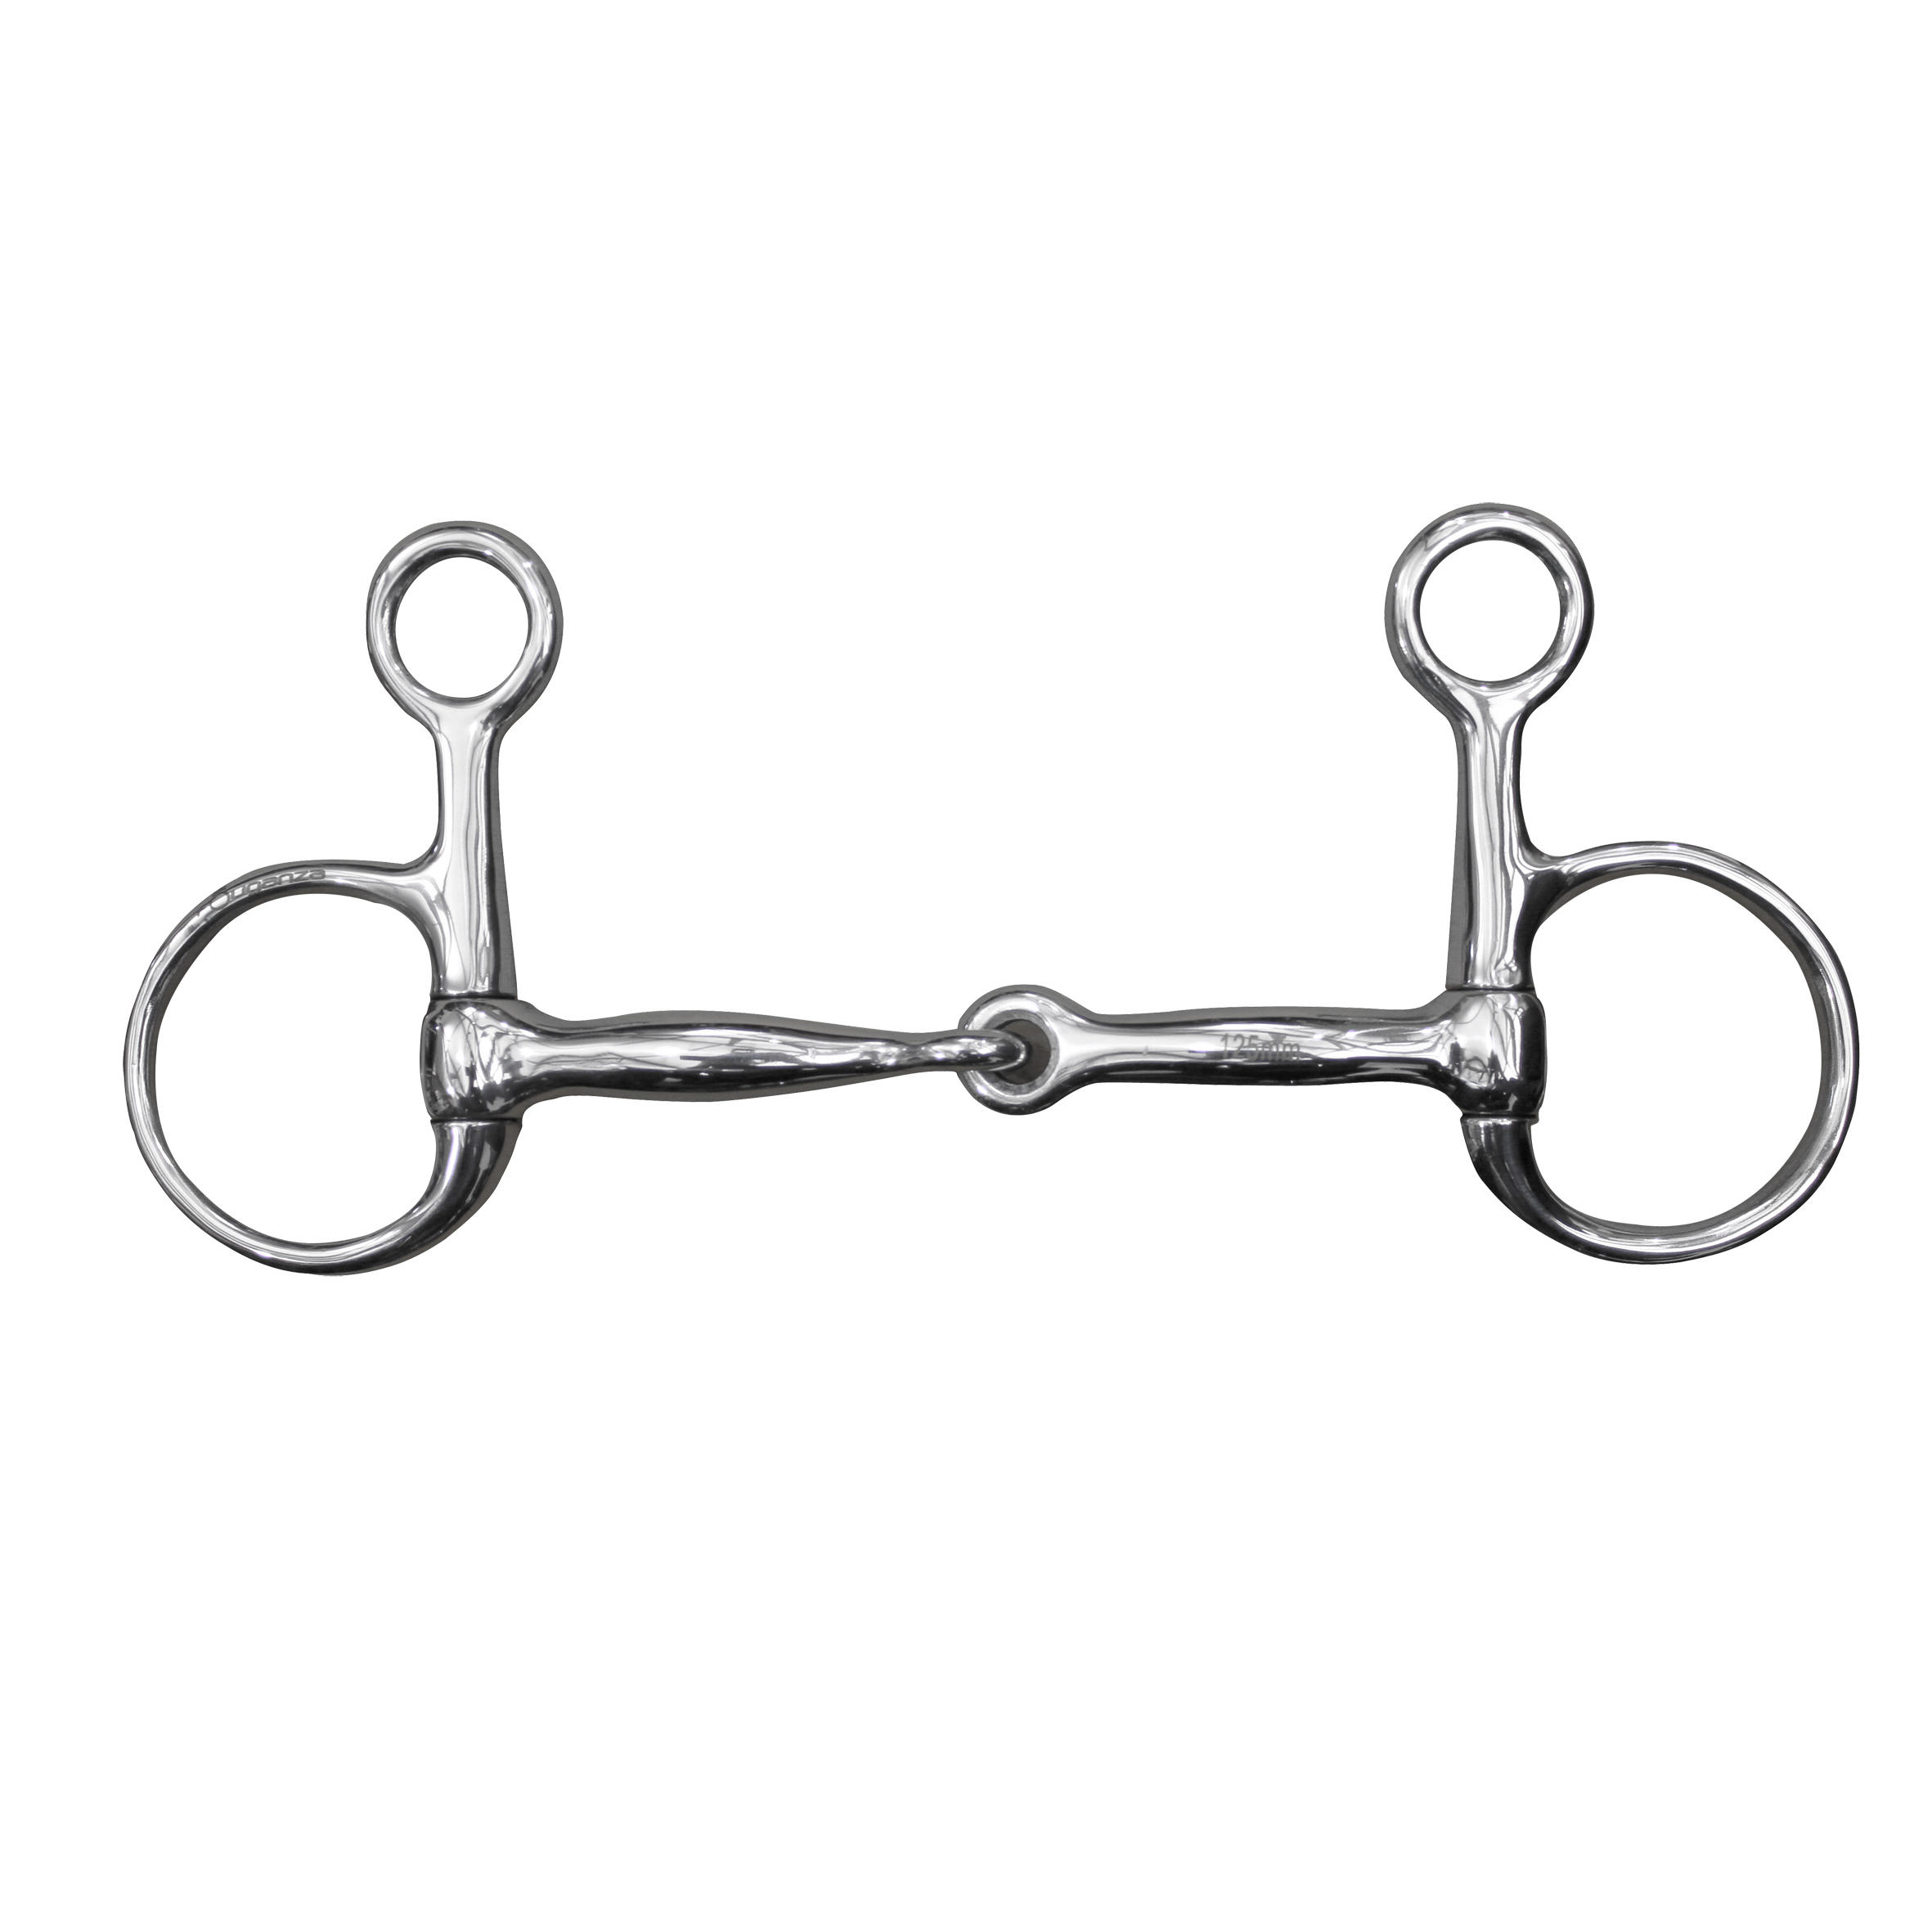 Baucher Stainless Steel Horse Riding Snaffle Bit For Horse/Pony 1/2